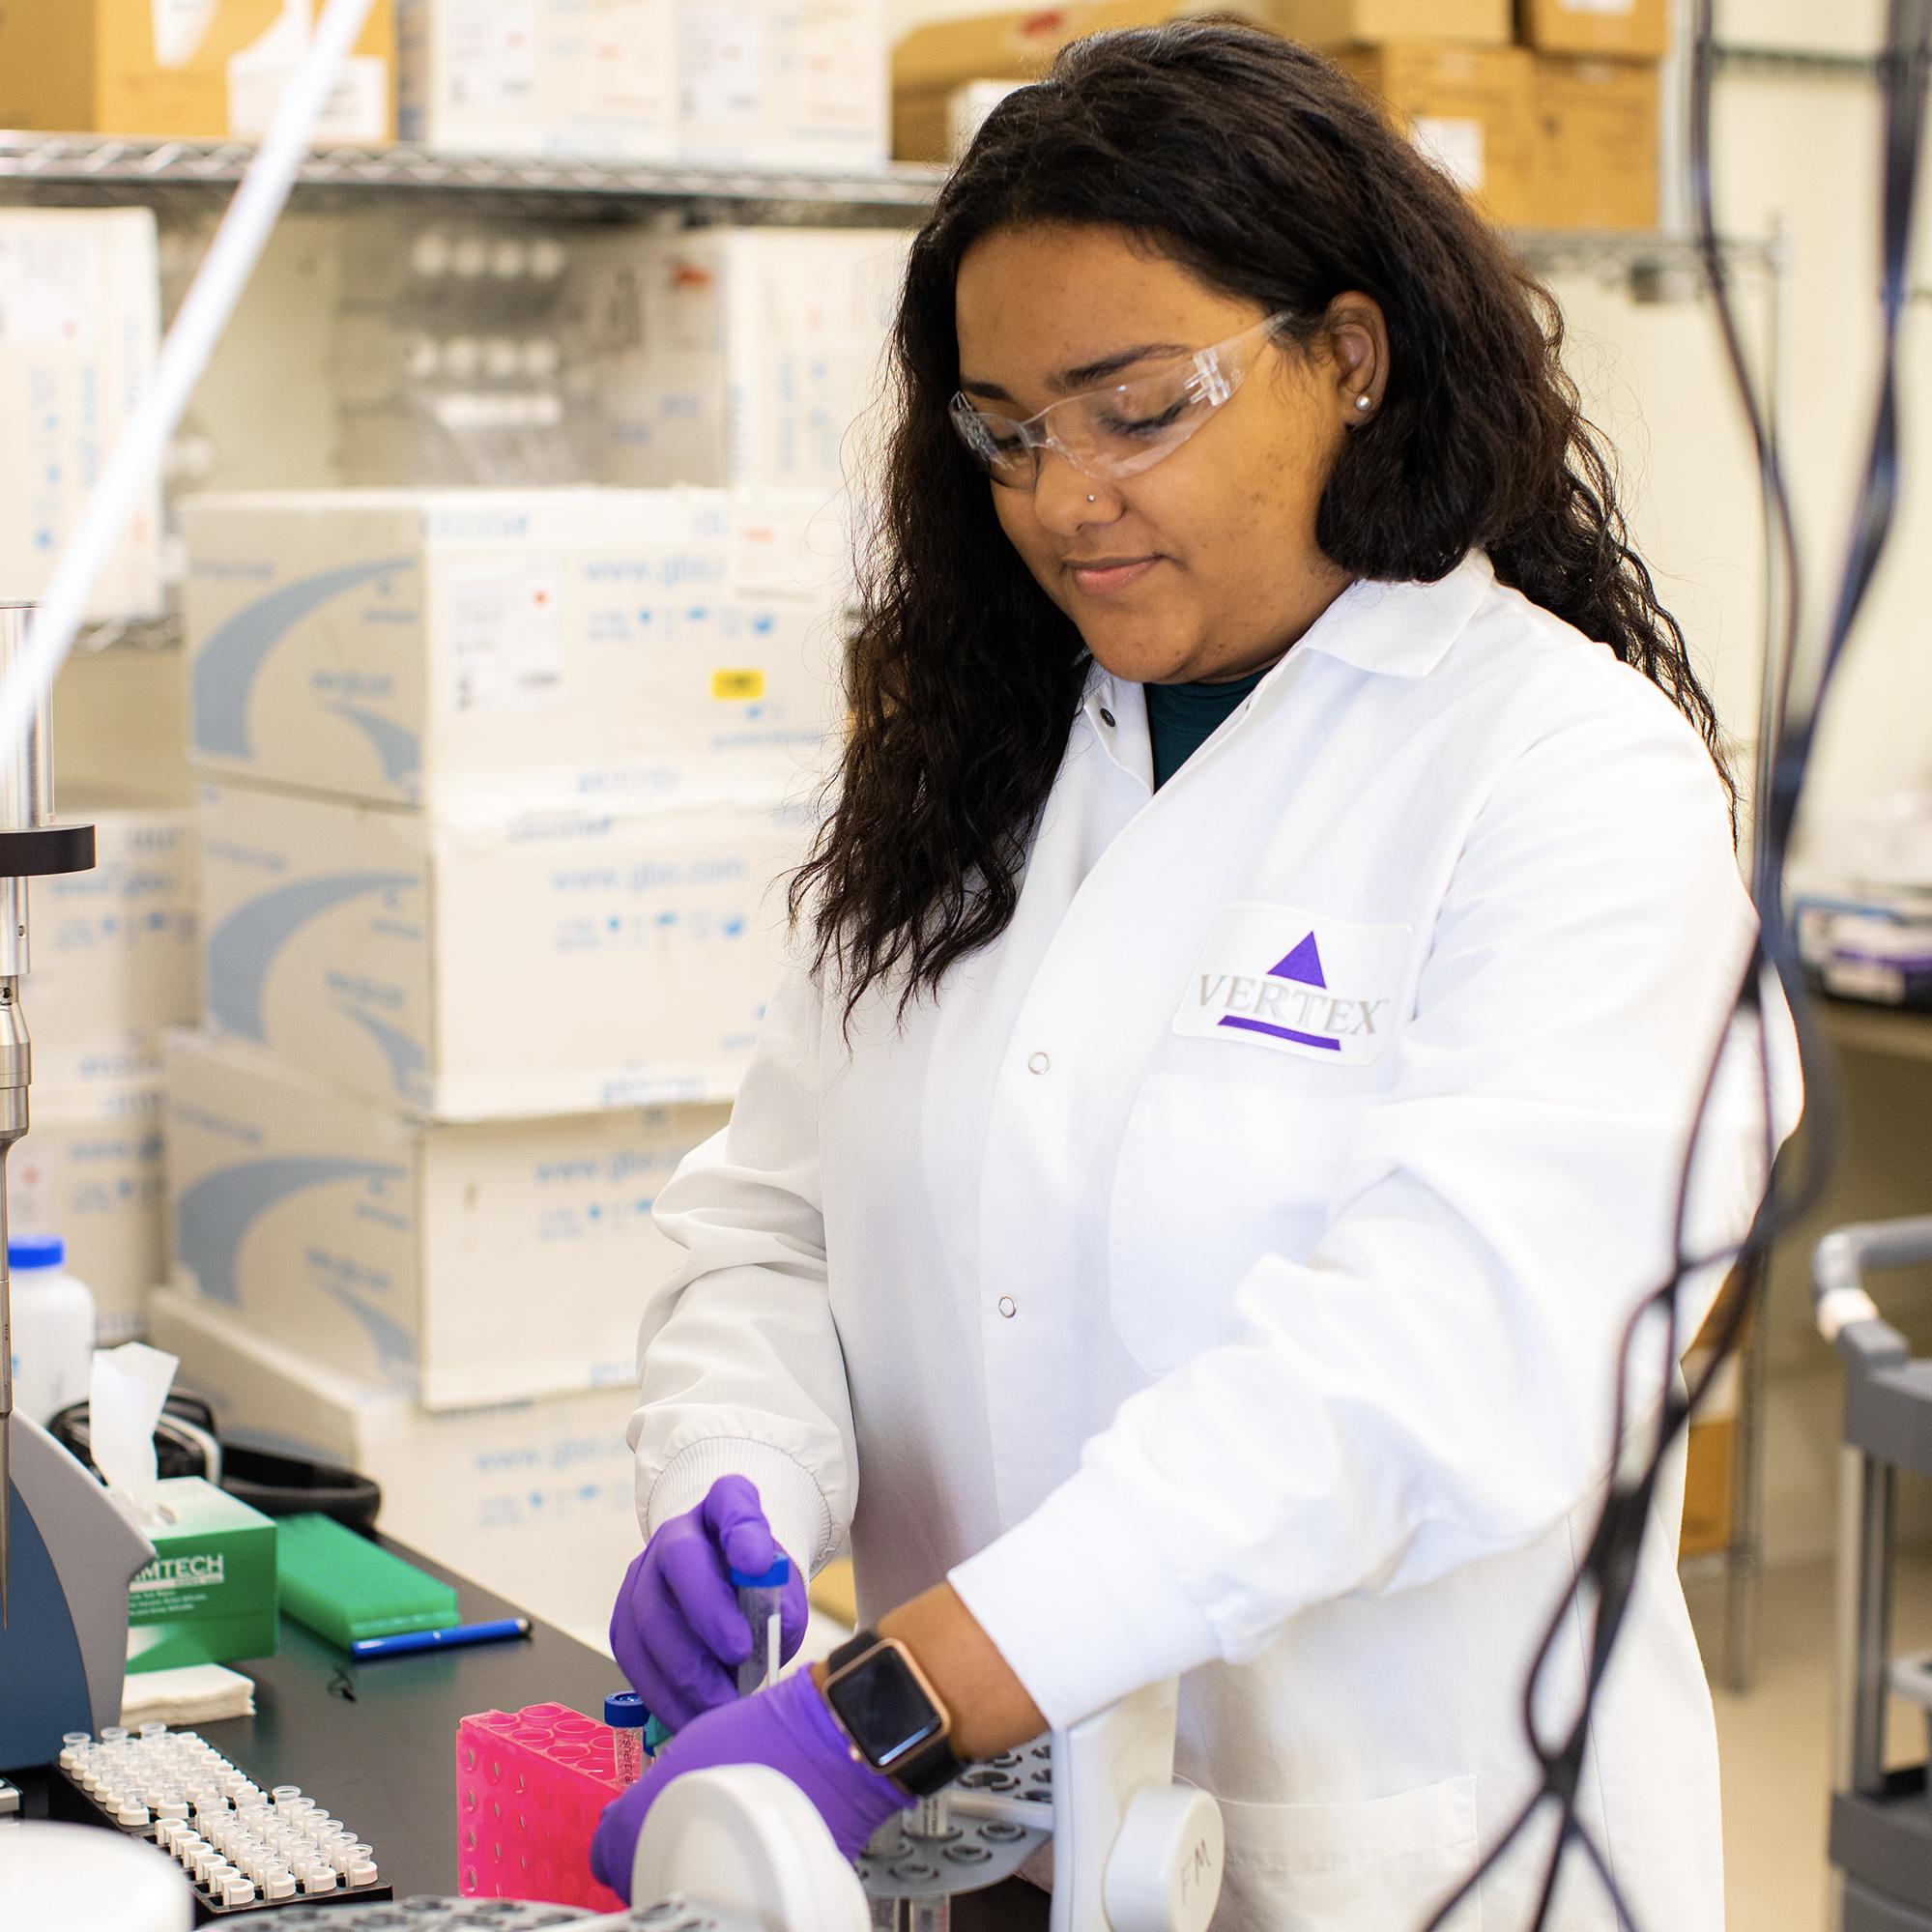 An image of a female high school student conducting an experiment in Vertex Pharmaceuticals' Boston Learning Lab. She is wearing a lab coat, safety glasses and gloves, and standing at a lab bench.